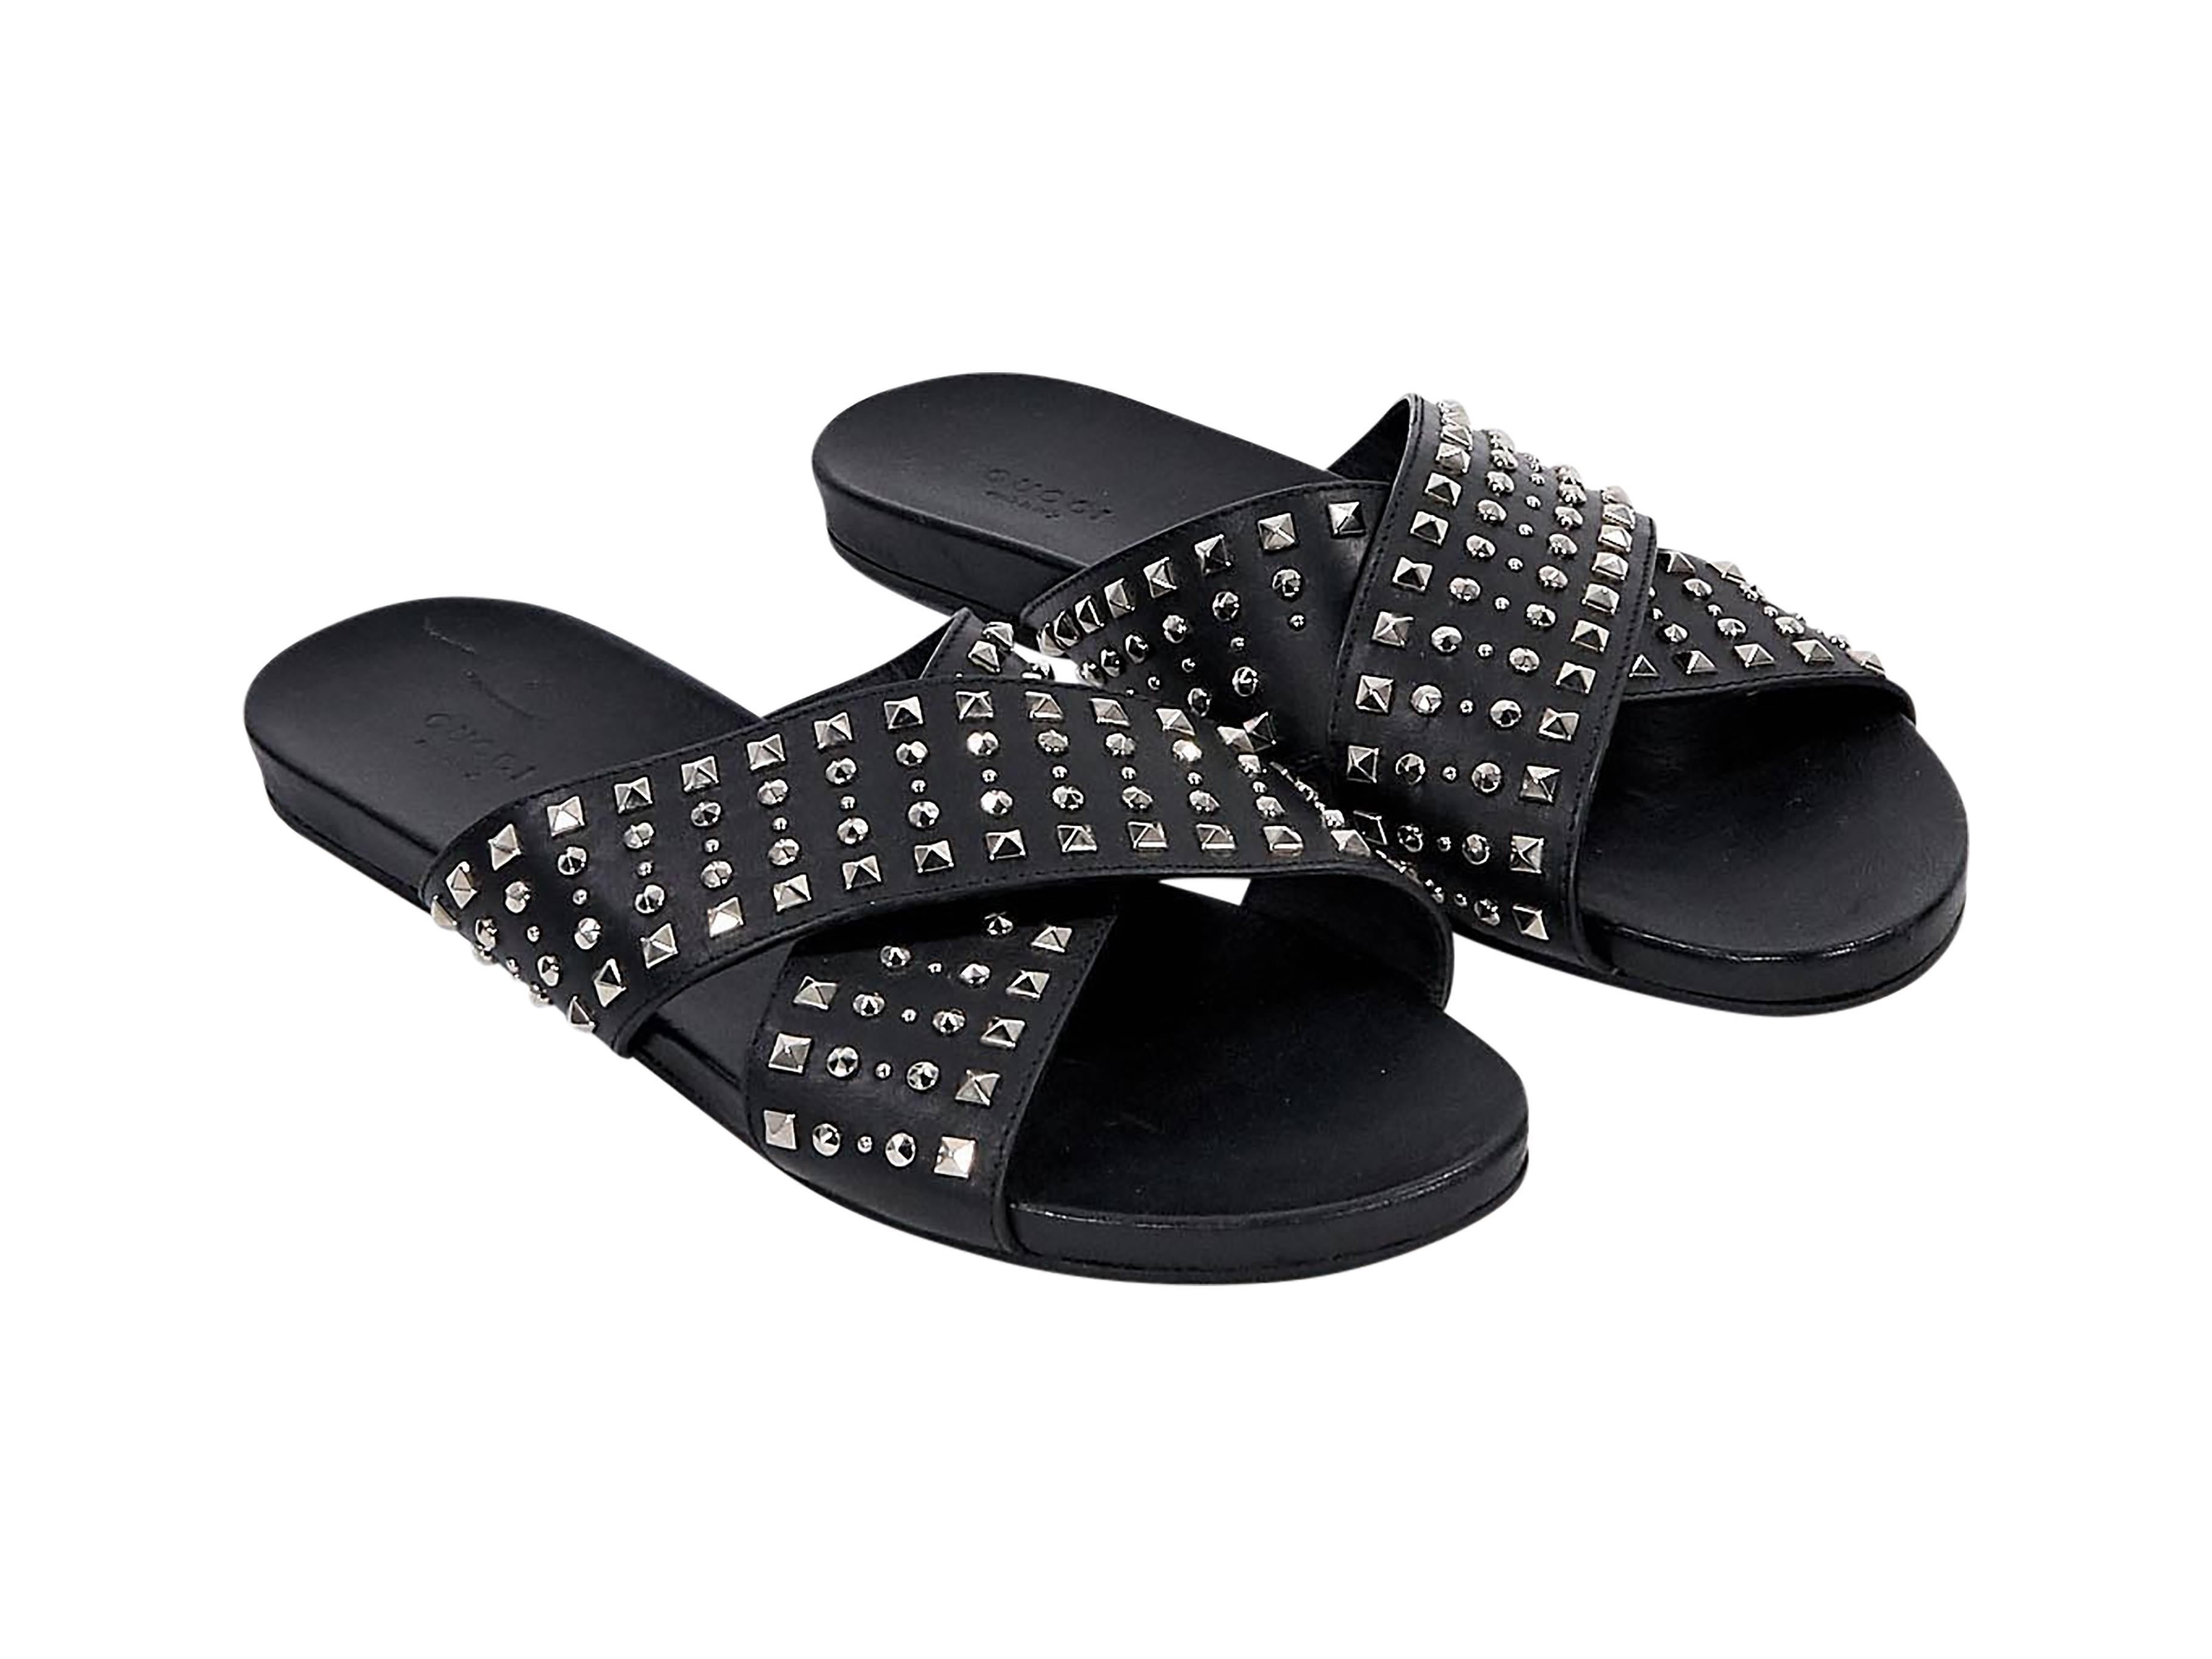 Product details:  Black leather studded slide sandals by Gucci.  Wide crisscross straps.  Open toe.  Slip-on style. 
Condition: Pre-owned. Very good.

Est. Retail $ 425.00